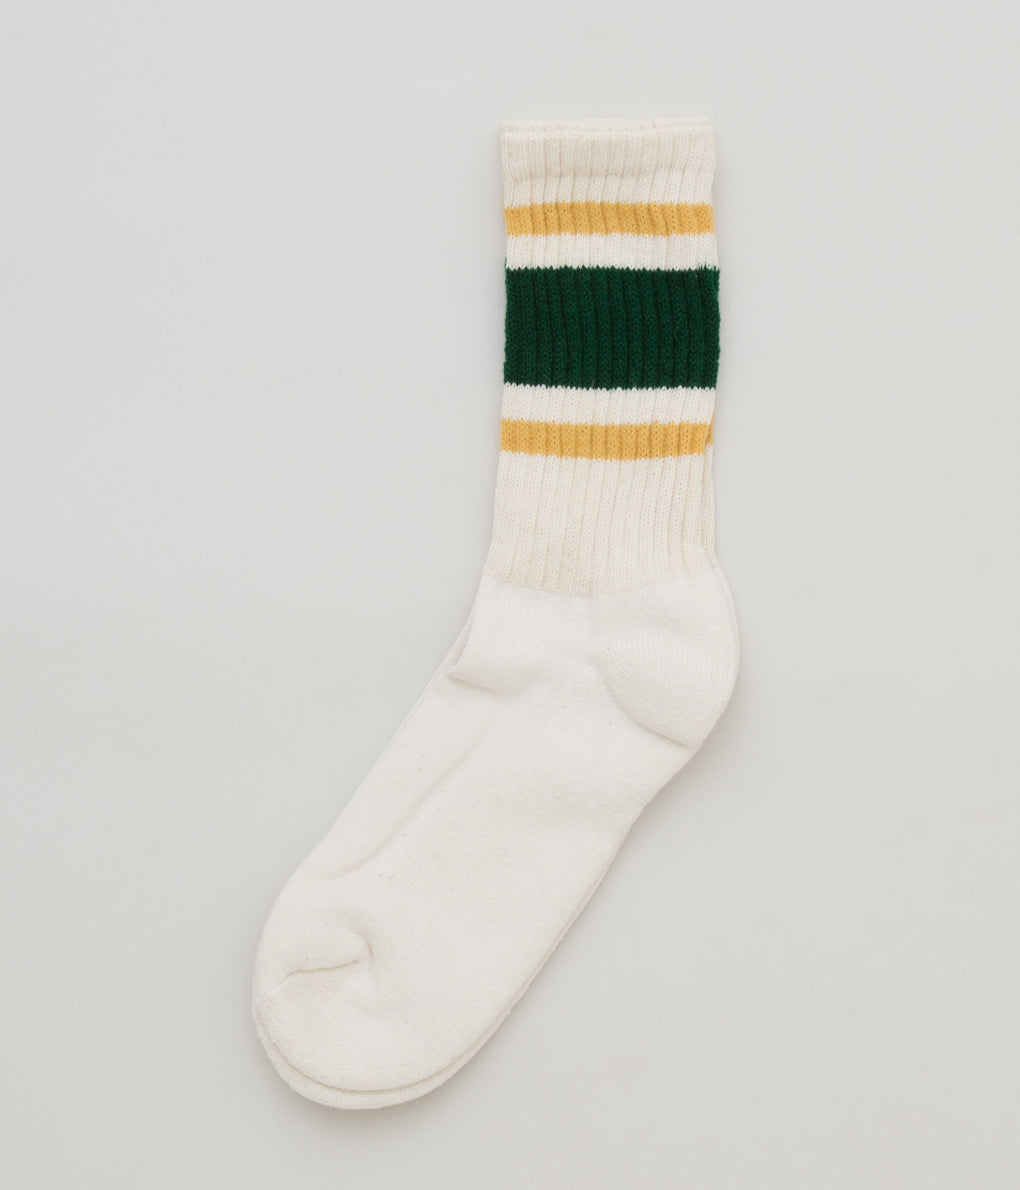 AMERICAN TRENCH "RETRO STRIPE SOCK" (FOREST GREEN×AMBER)